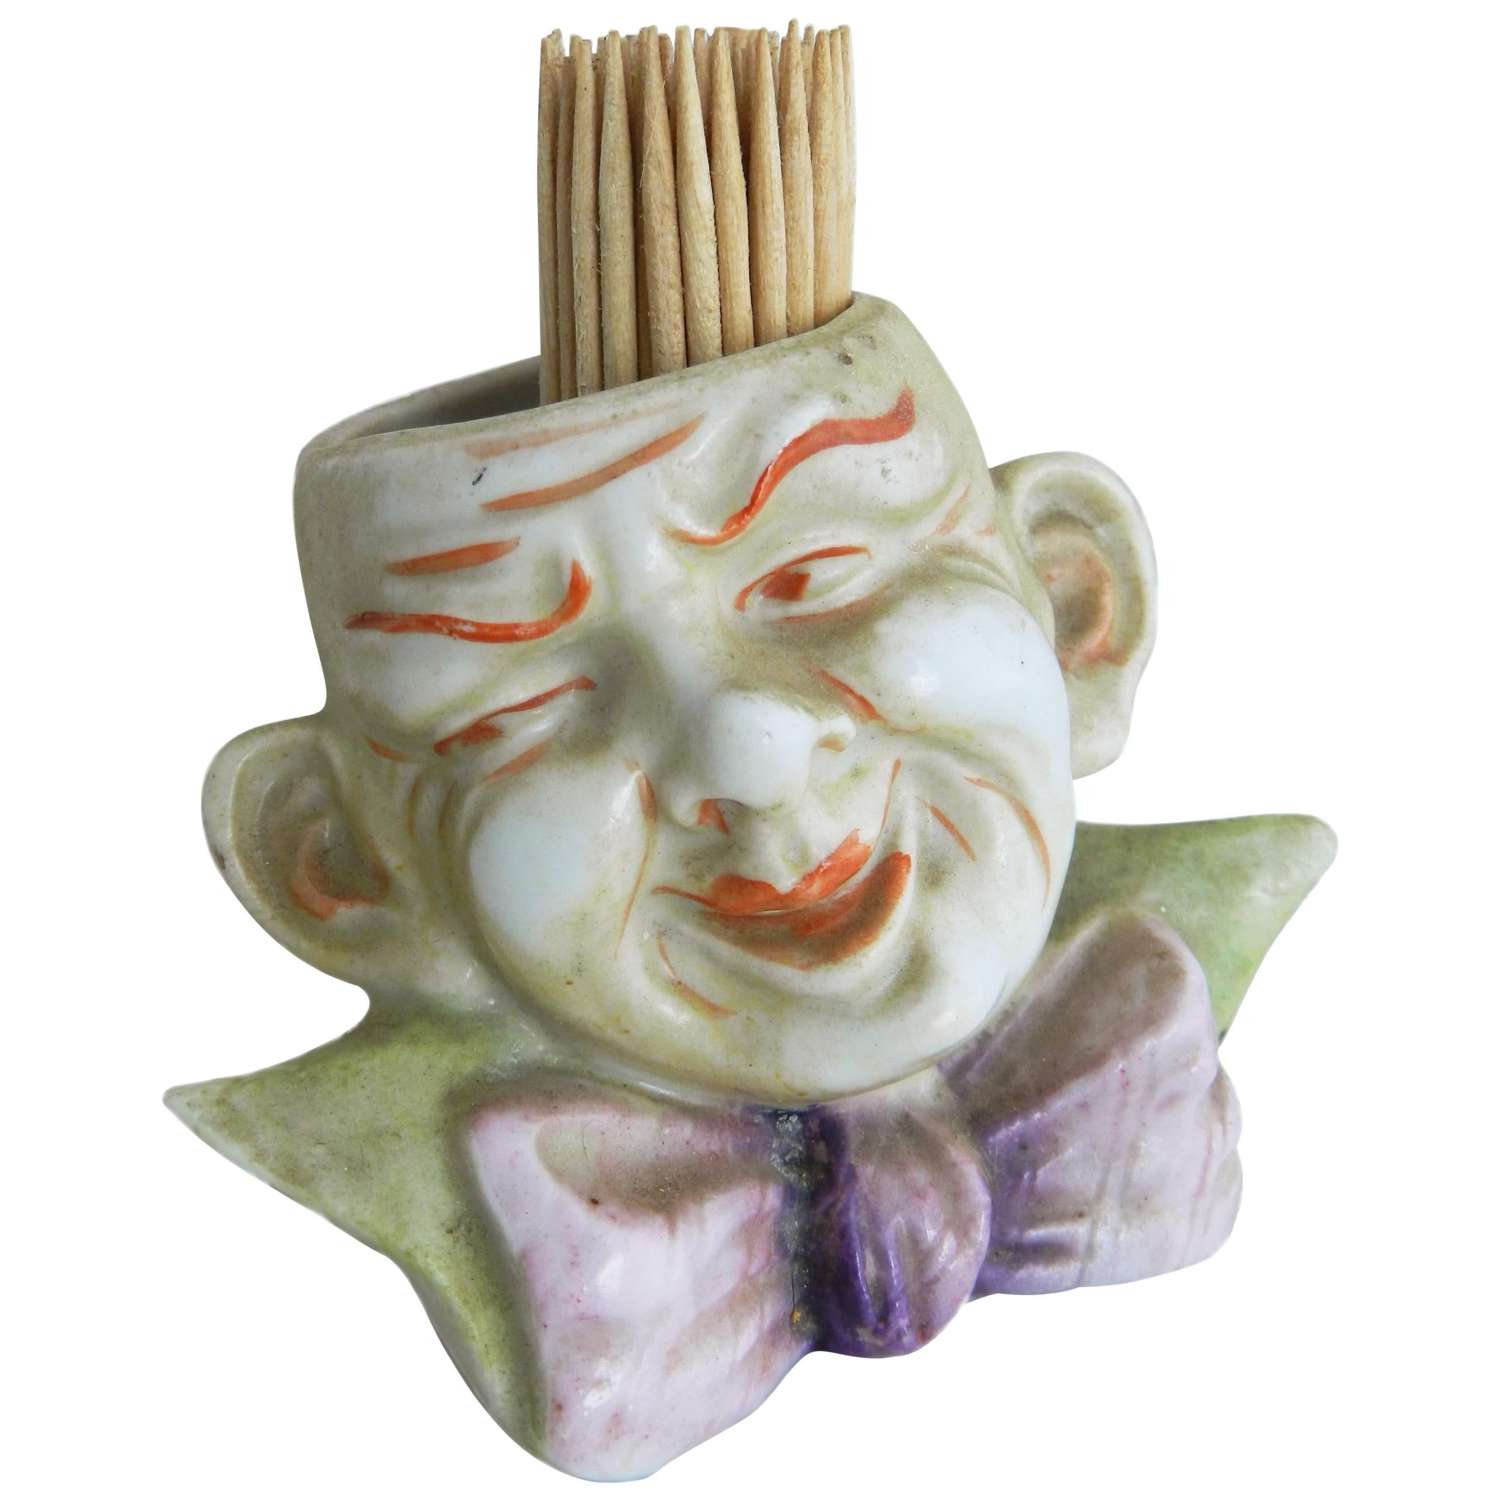 Small Jester Face Vase Tooth Pick or Flowers, circa 1920